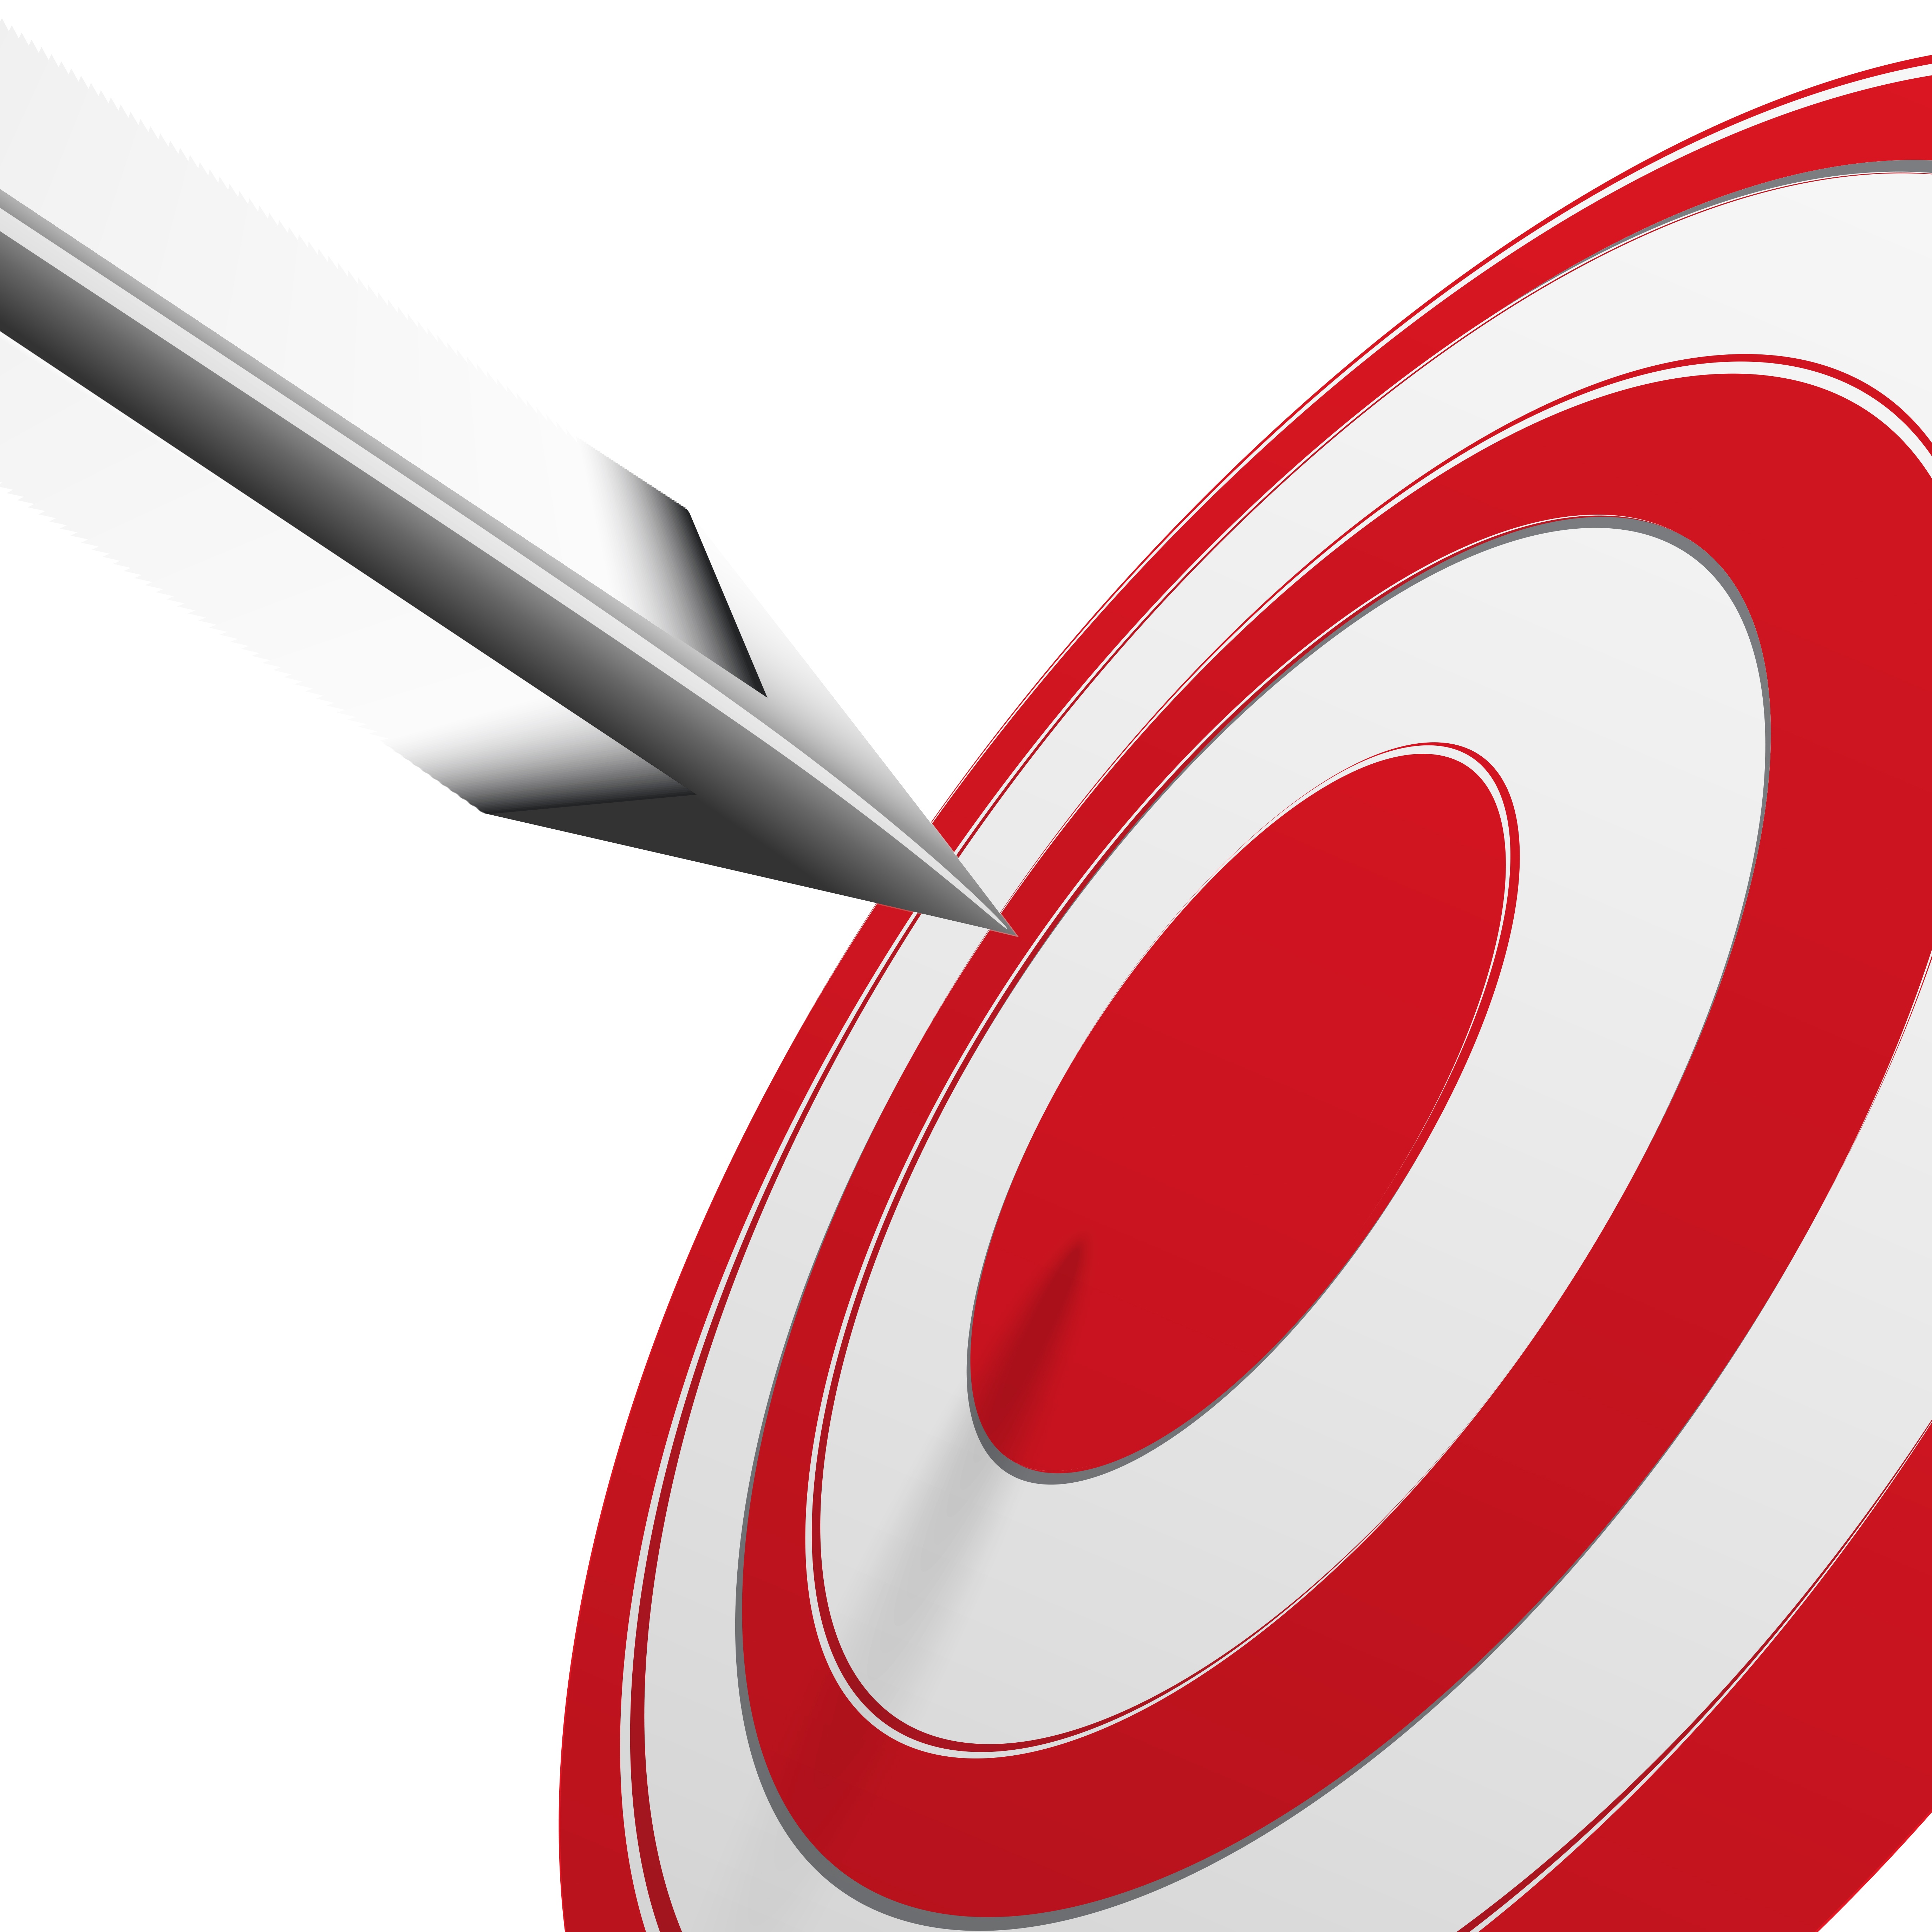 Sales Targets: You Can’t Hit Them if You Don’t Have Them